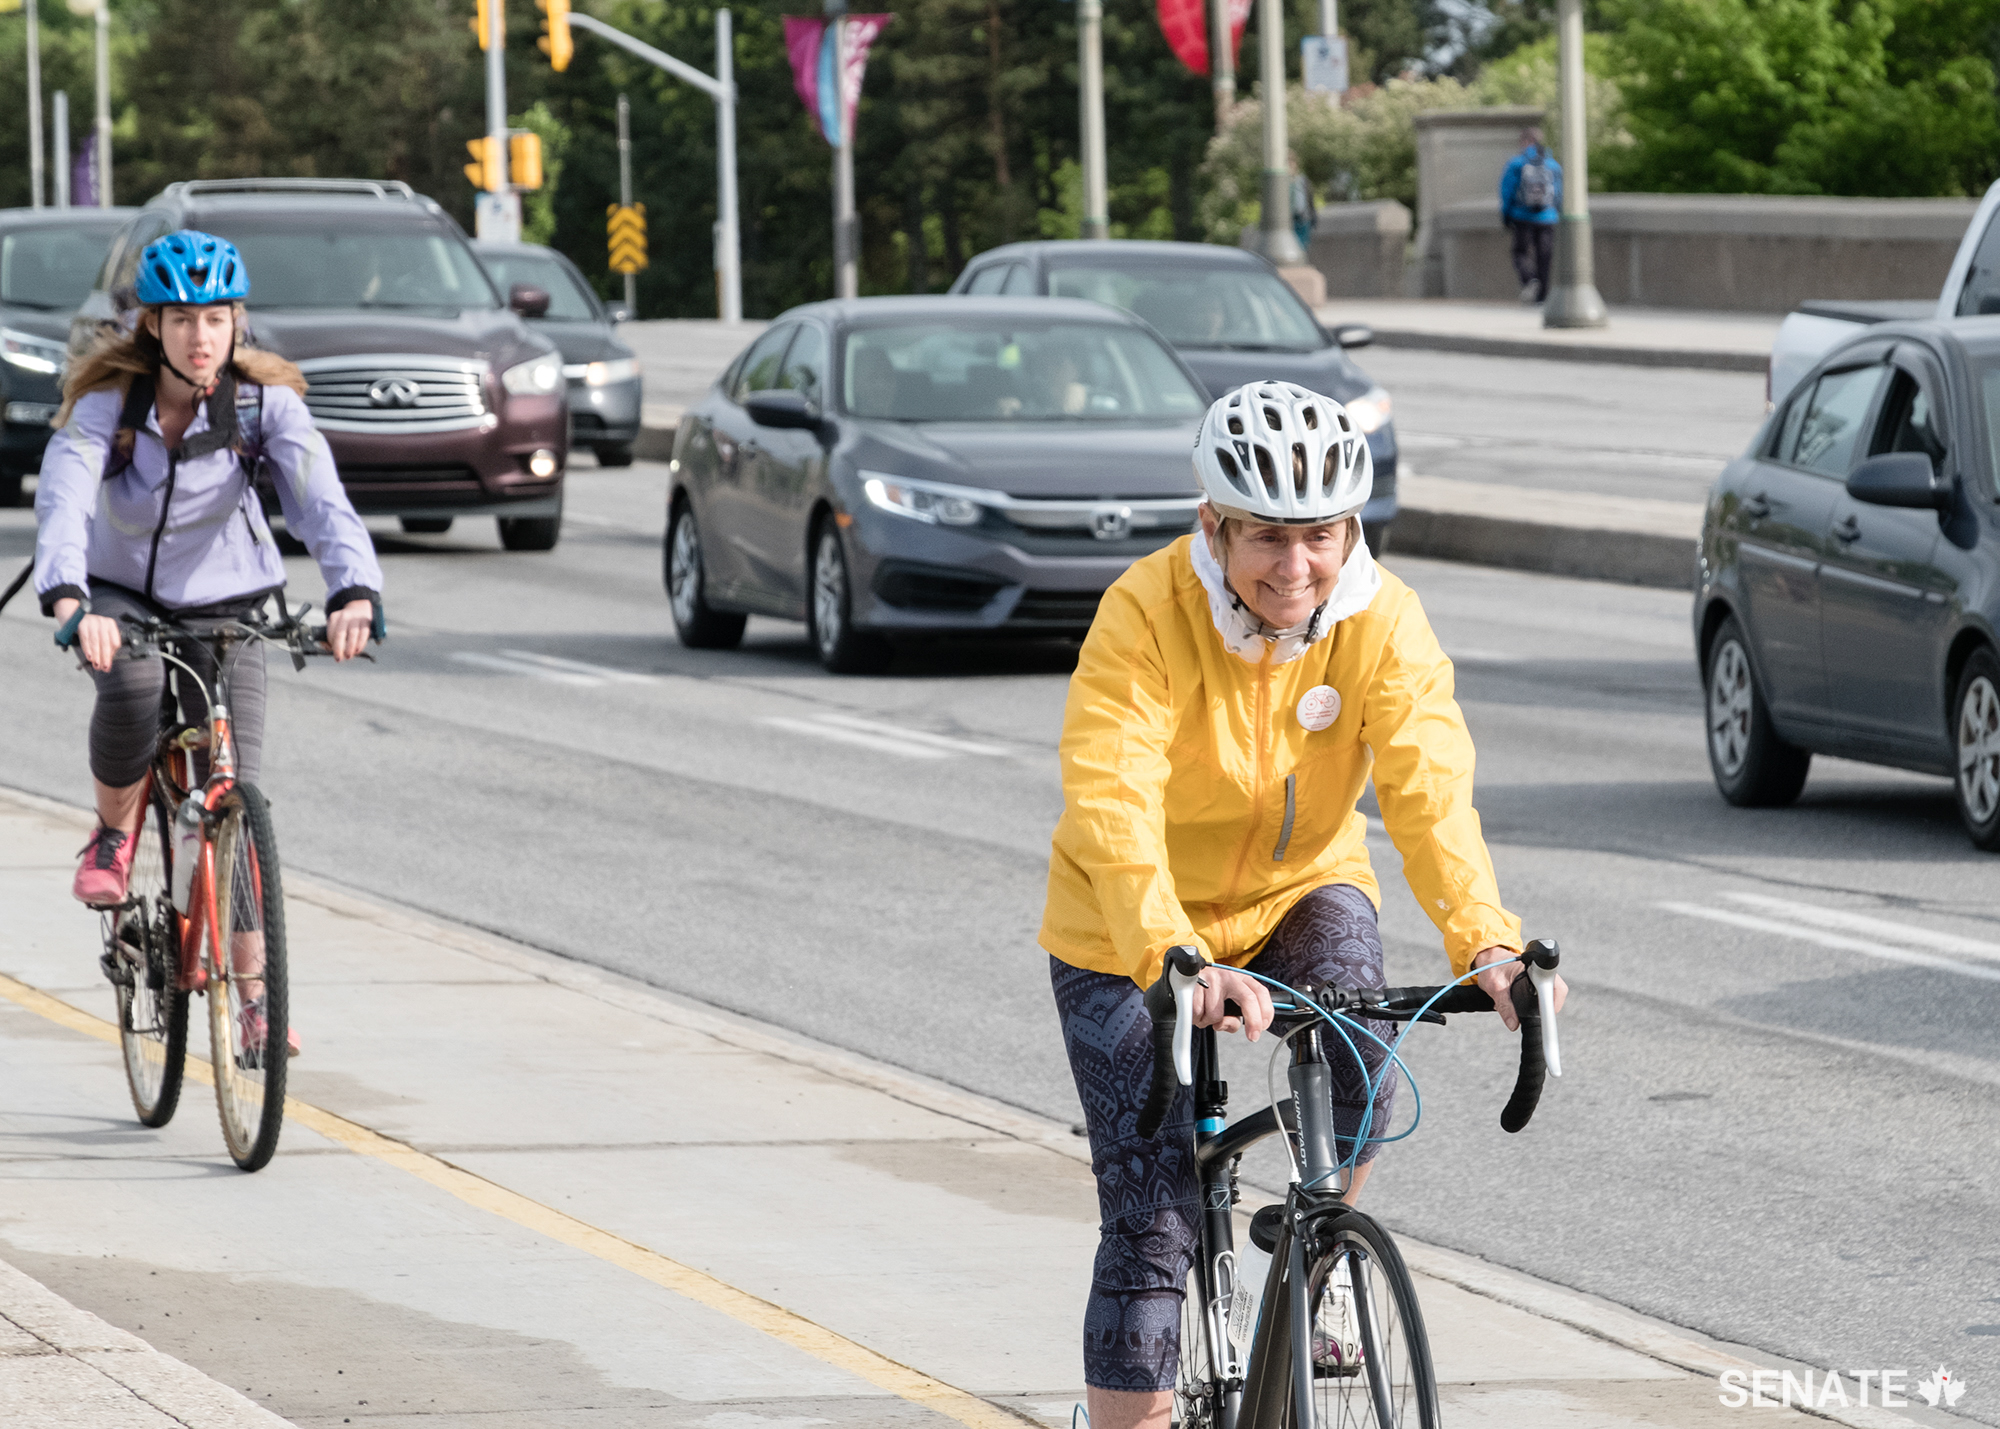 "National Health & Fitness Day is pleased to help connect Canadian cycling advocates with federal legislators for a discussion on the promotion of cycling.  Active transportation is an excellent way to increase overall physical activity of Canadians and help reduce traffic congestion,” says Senator Raine, seen here riding up the Portage Bridge over the Ottawa River en route to Gatineau, Quebec.